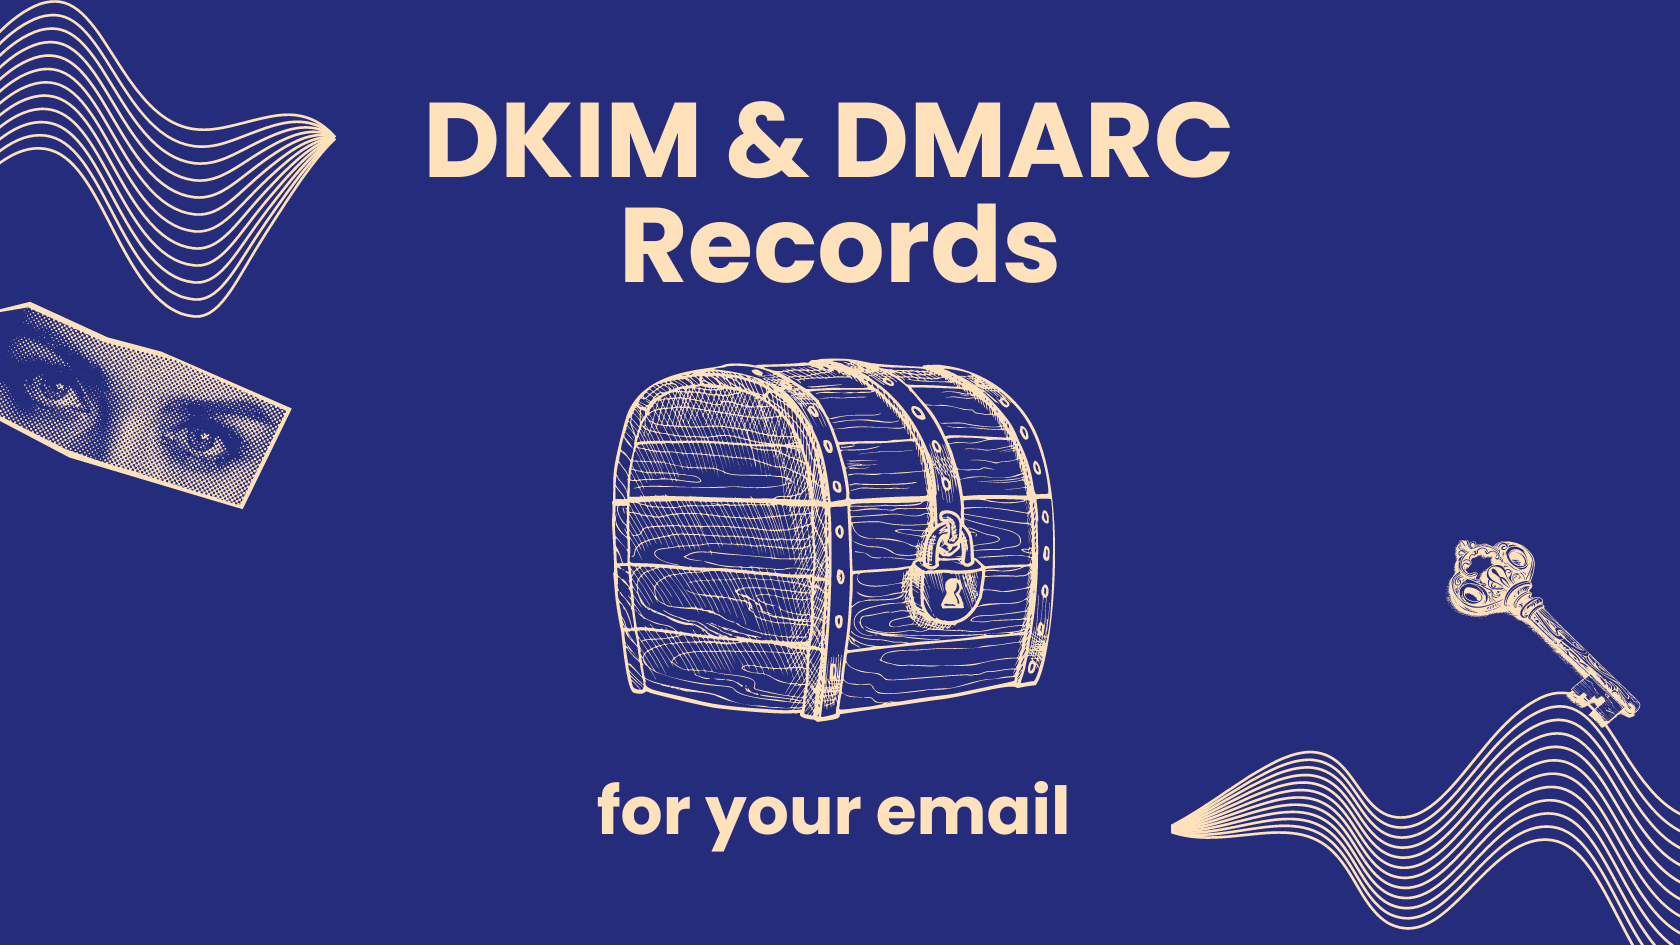 How to add DKIM and DMARC records to your email